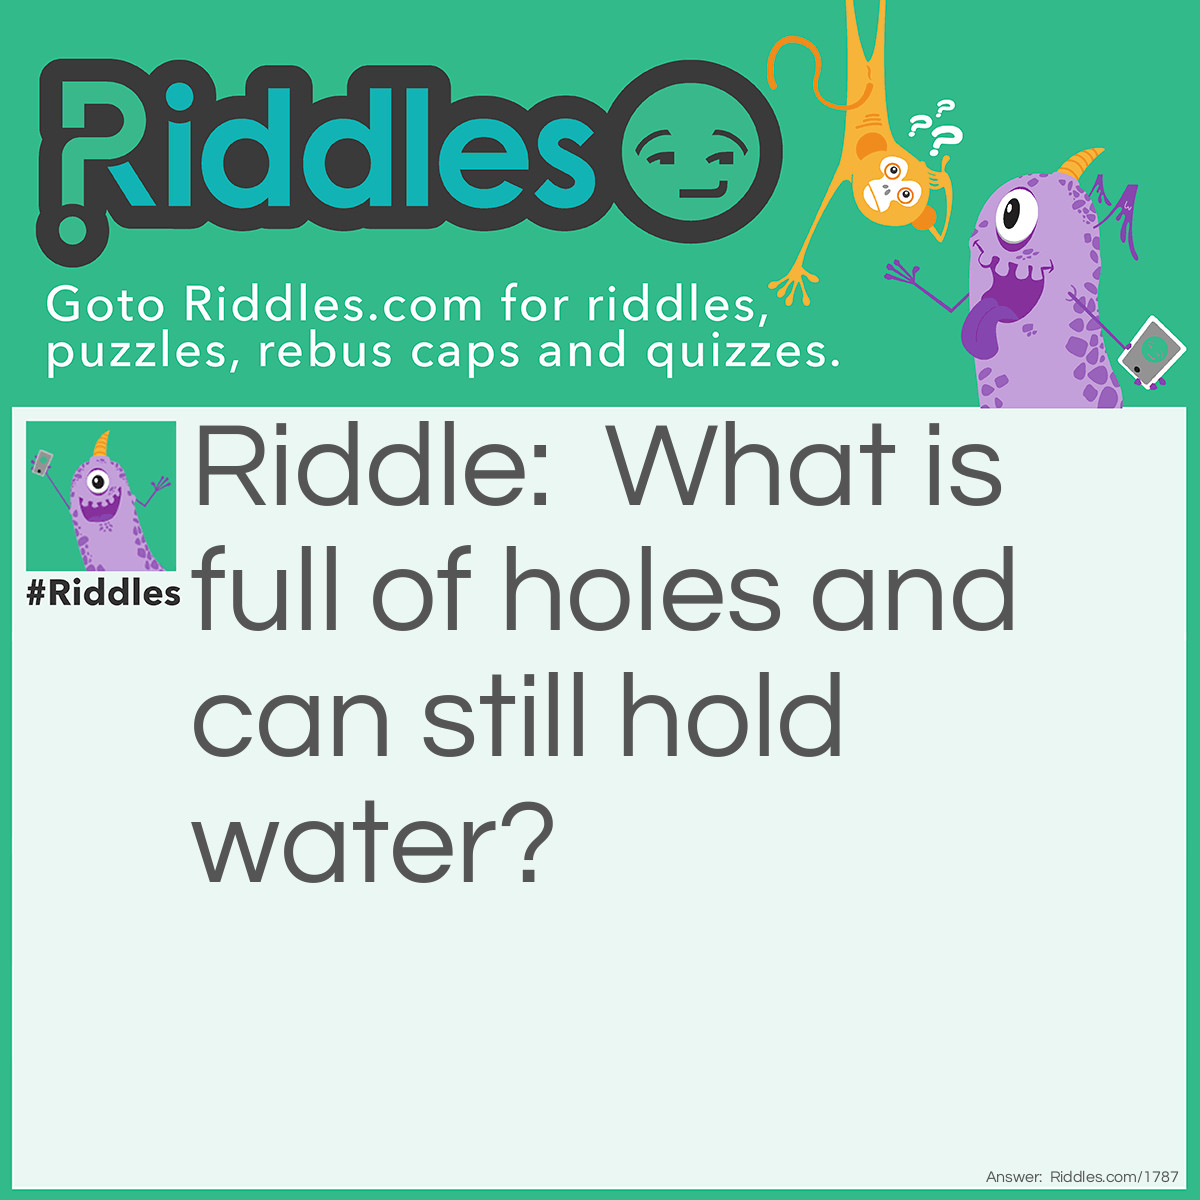 Riddle: What is full of holes and can still hold water? Answer: A sponge.